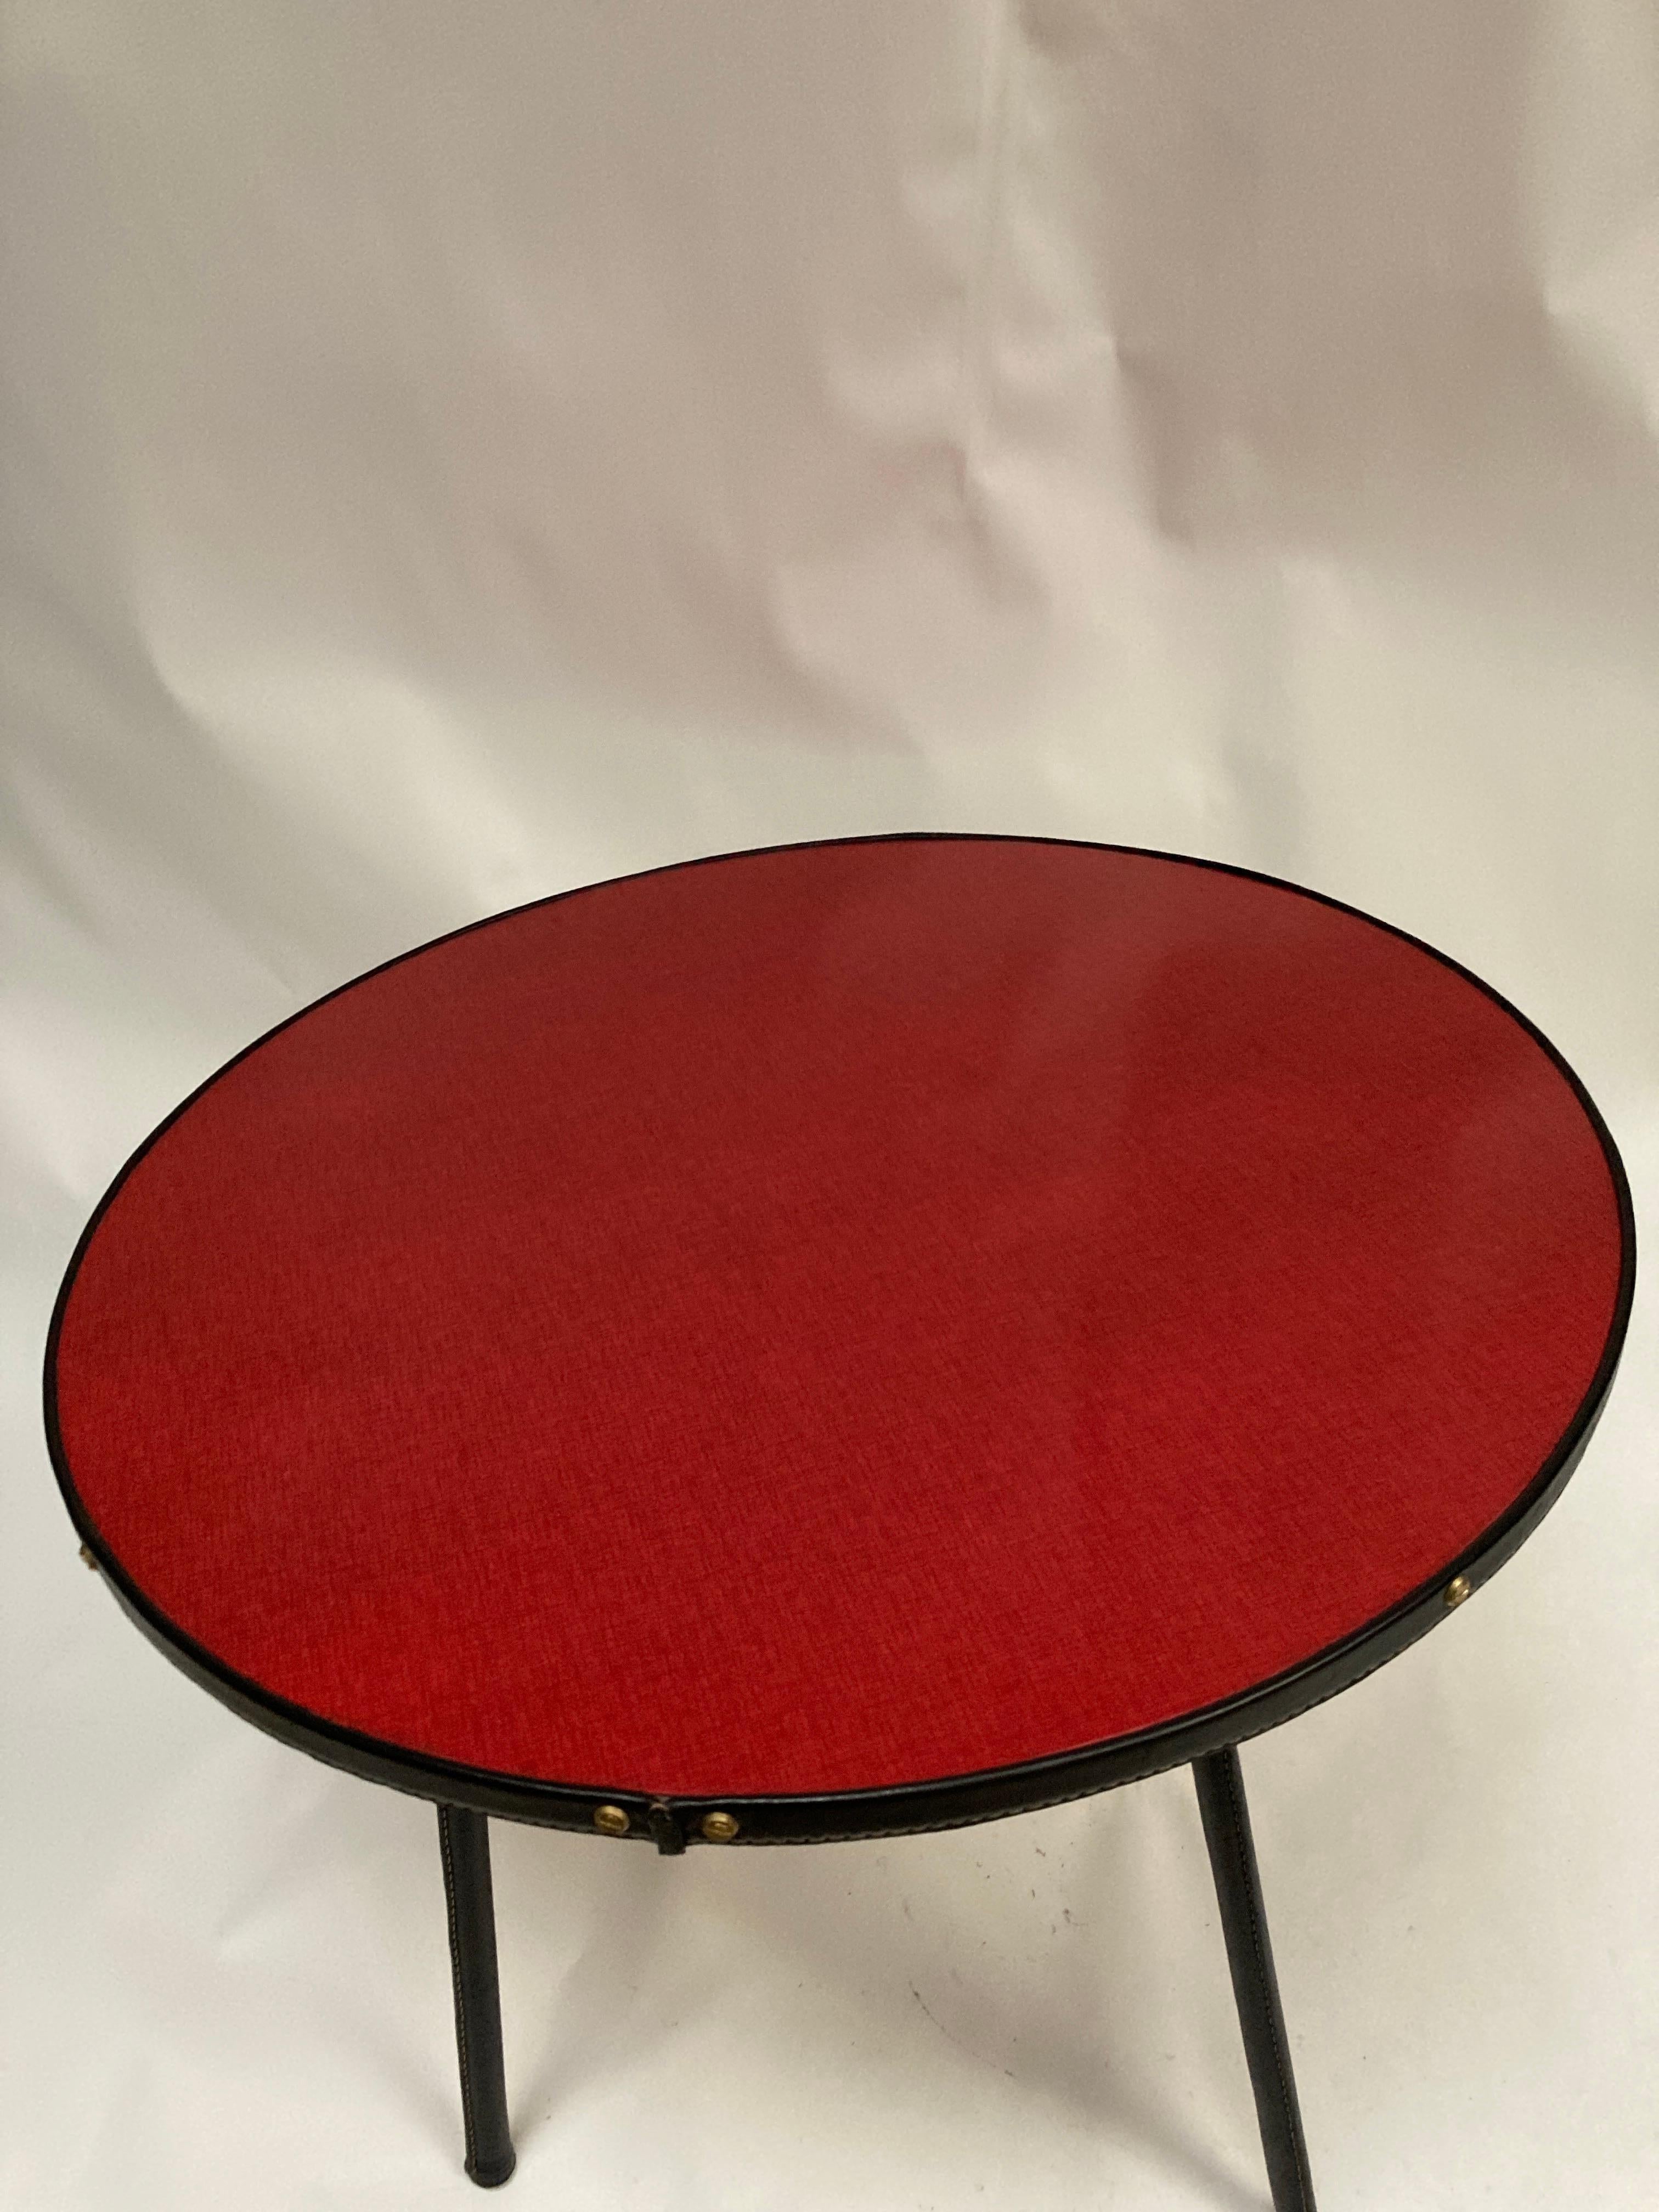 1950's Stitched Leather and formica Circular table by Jacques Adnet For Sale 1